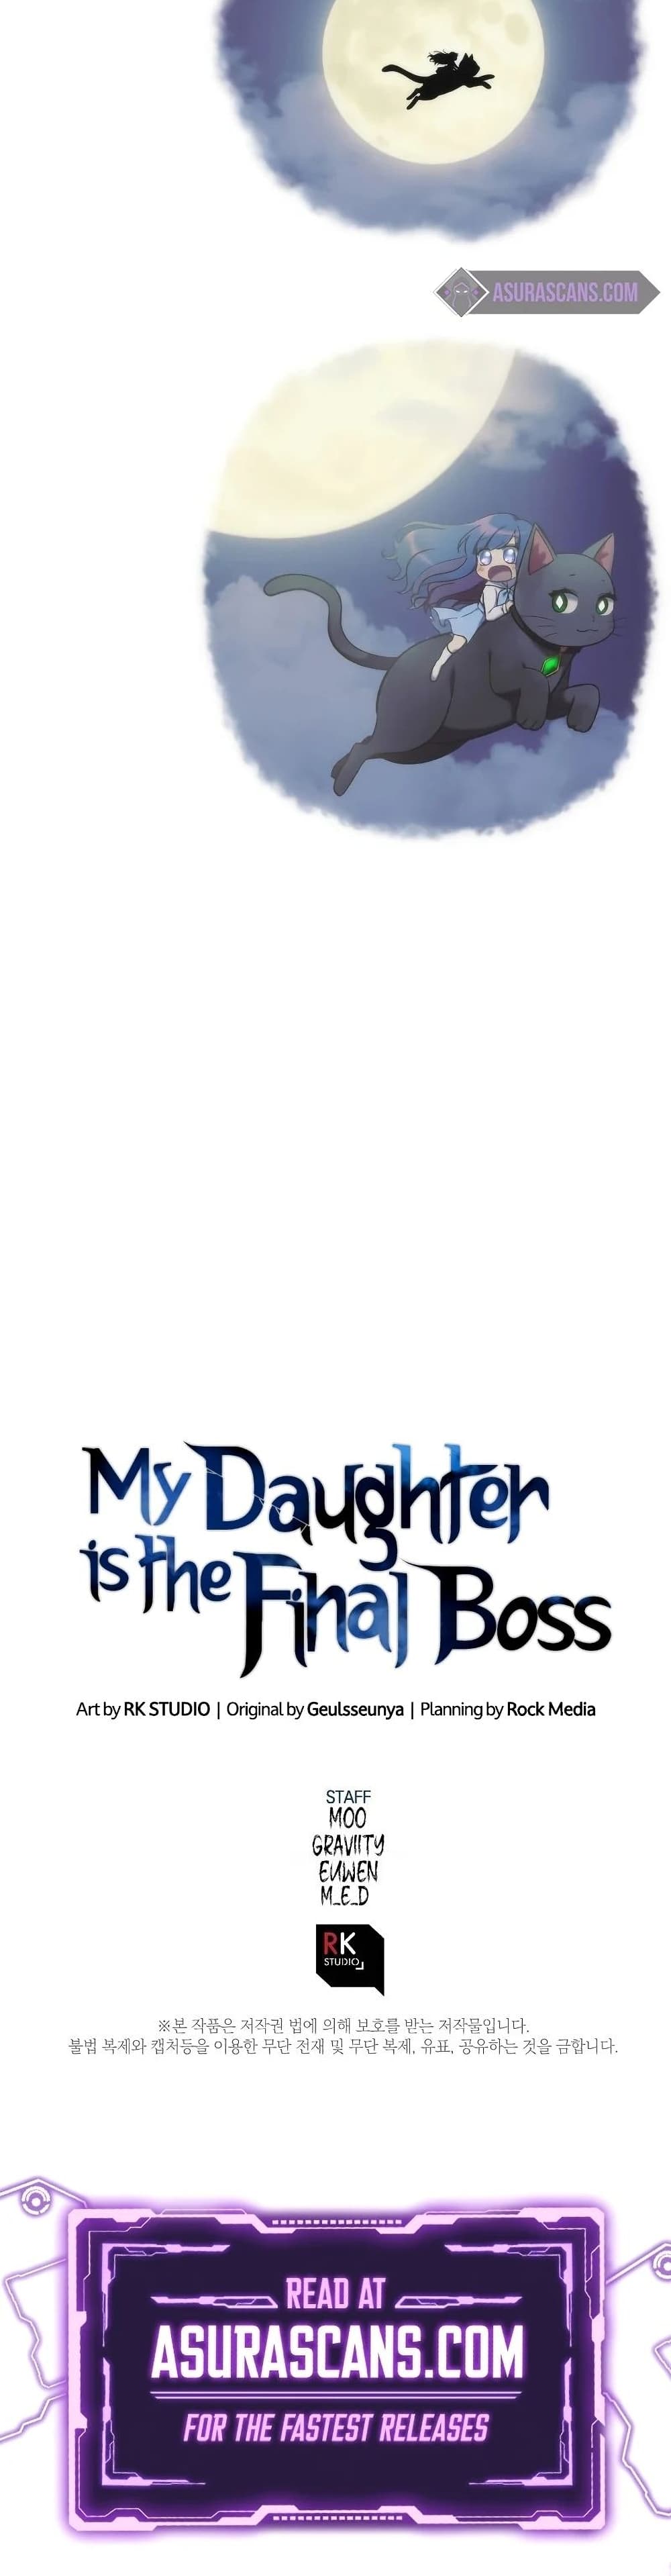 My Daughter is the Final Boss 38-38